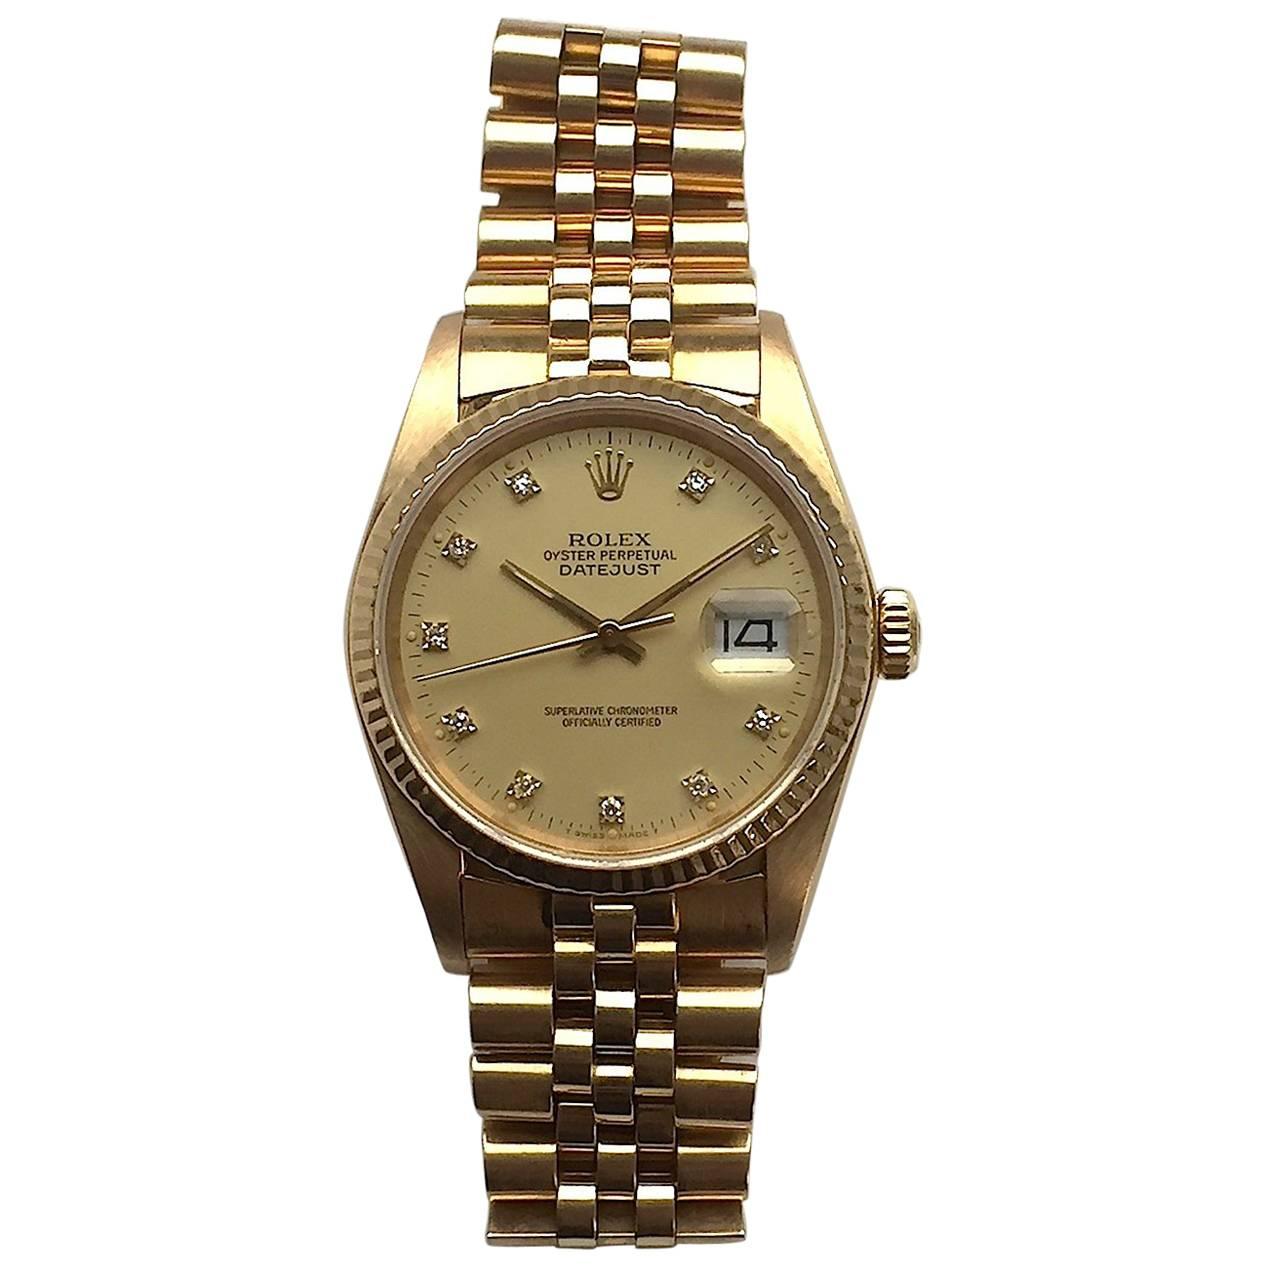 Rolex 18K Yellow Gold Oyster Perpetual Factory Diamond Dial Datejust Watch